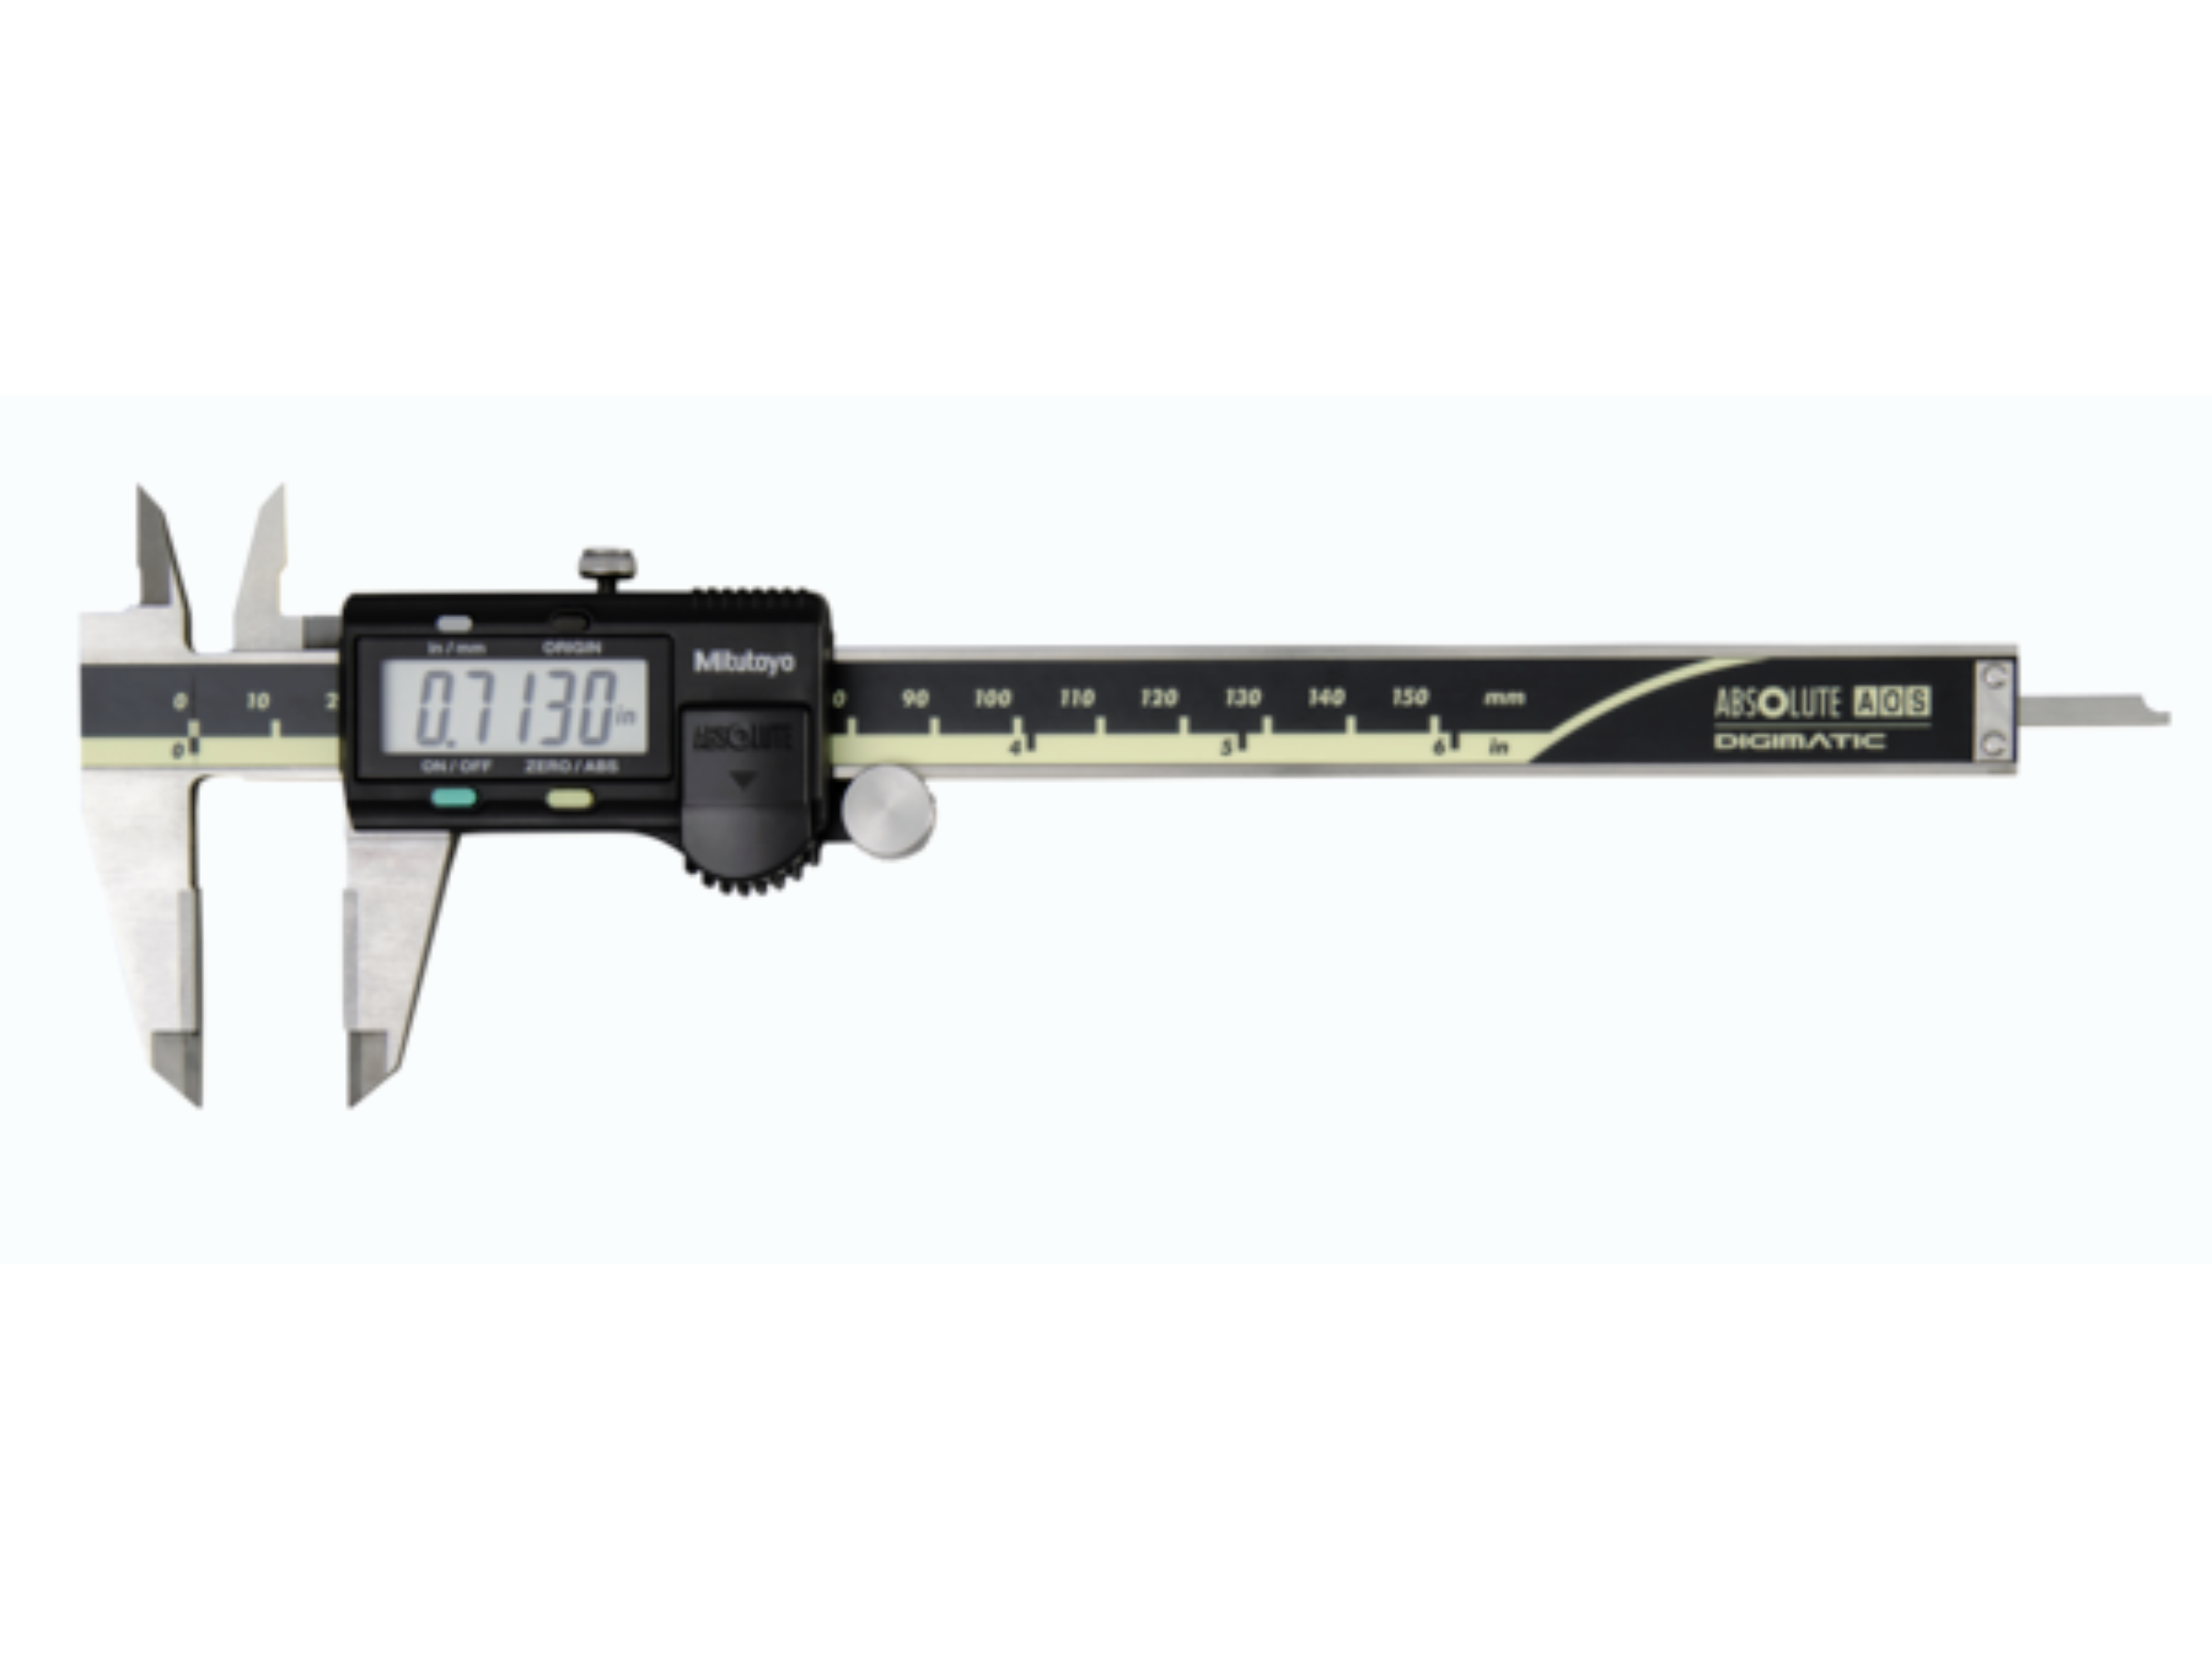 Digital ABSOLUTE AOS Calipers 0-150mm (0-6") With Output Carbide OD/ID Jaws 500-175-30